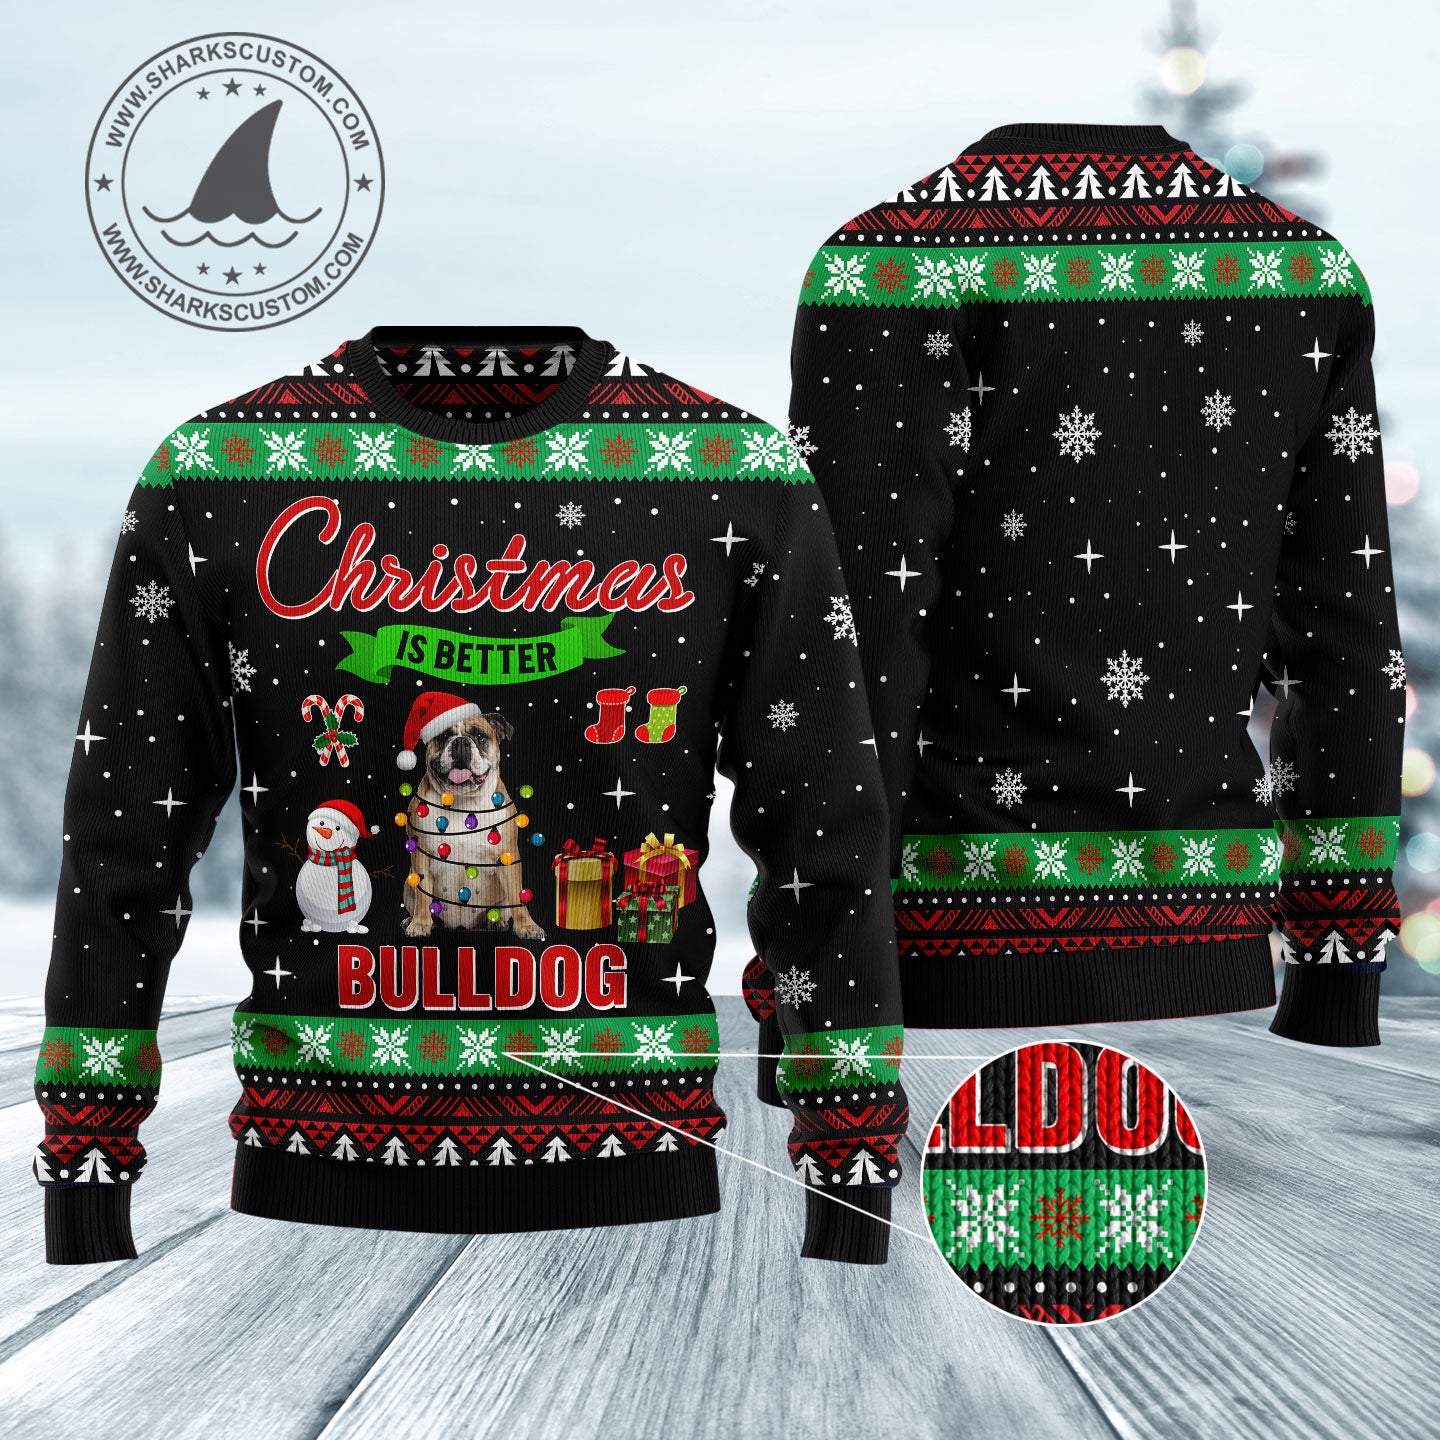 Christmas is better with Bulldog HT061123 Ugly Christmas Sweater